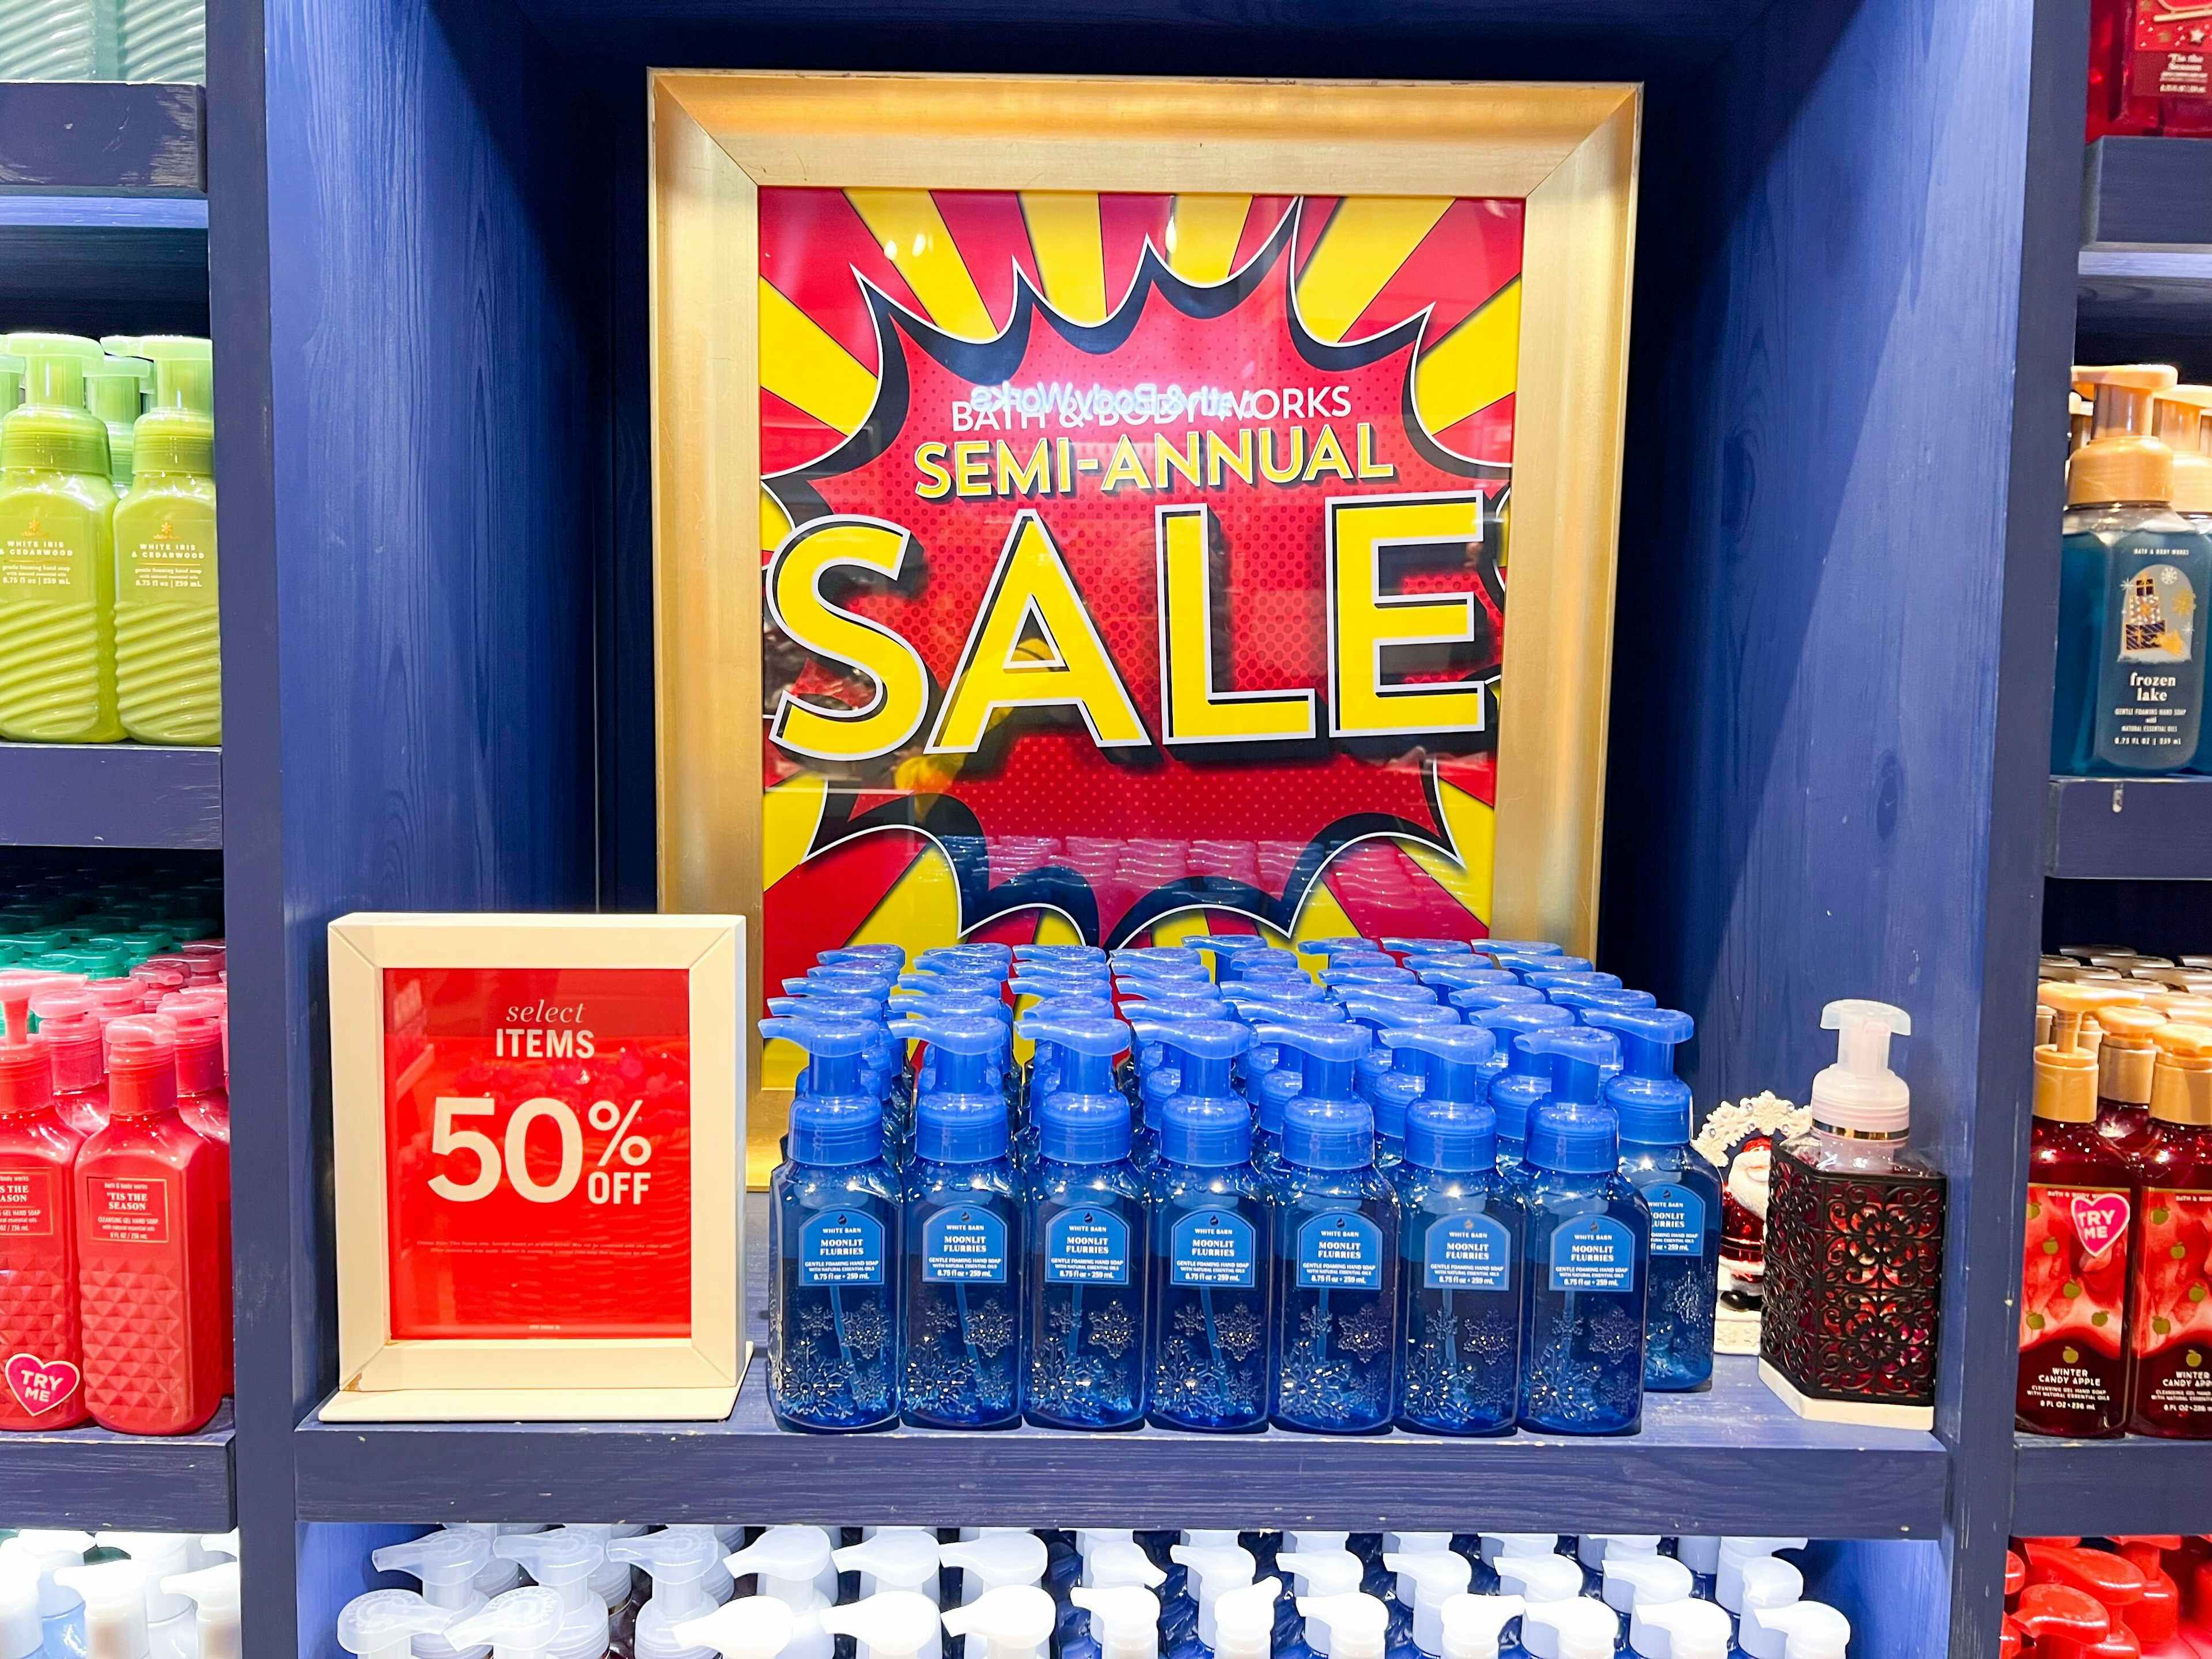 hand soaps on shelf in front of bath and body works semi annual sale sign